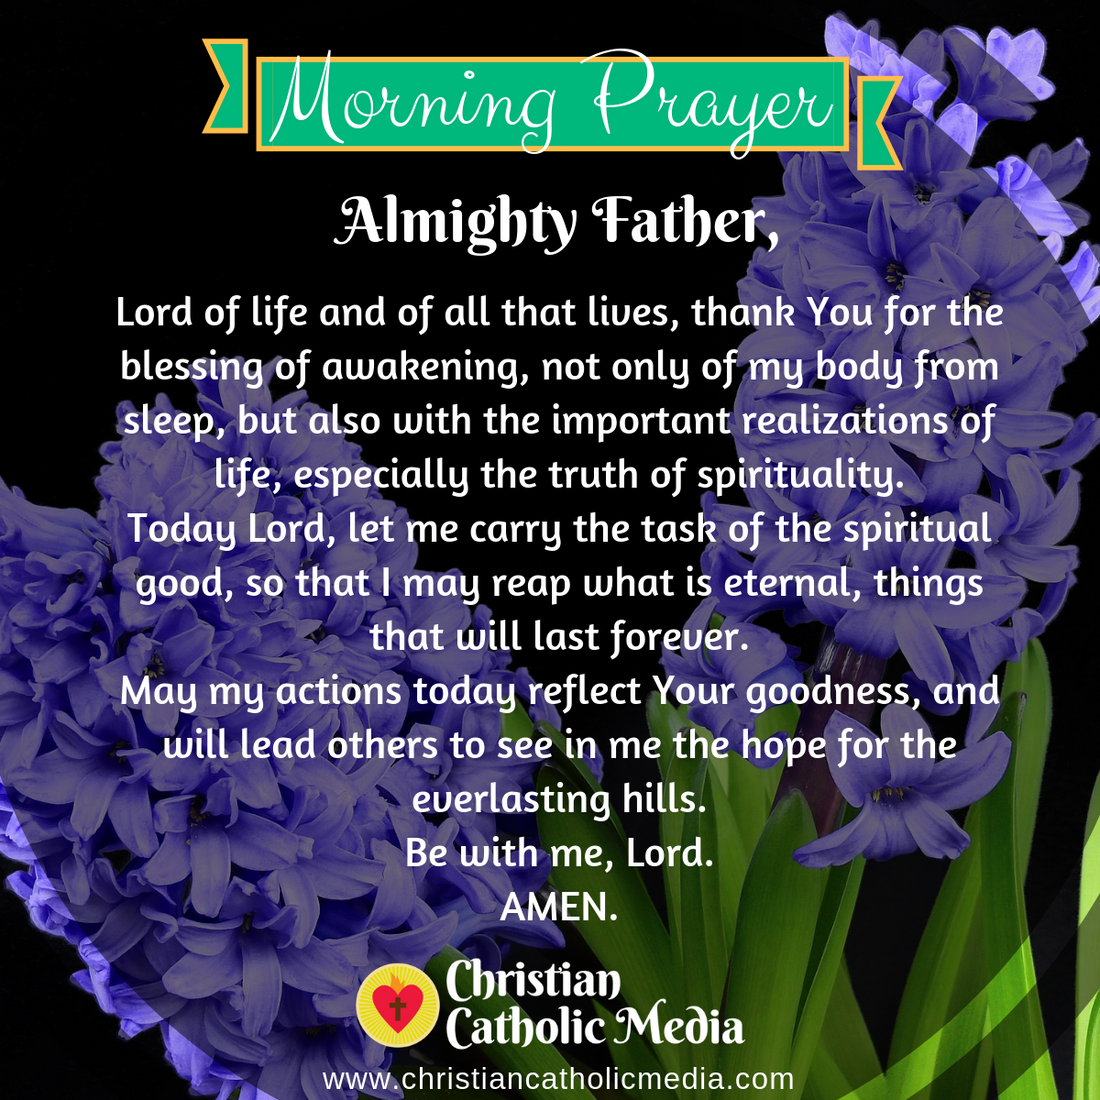 Tuesday Morning Prayer ⋆ Our Father Prayer - Christians United in Faith